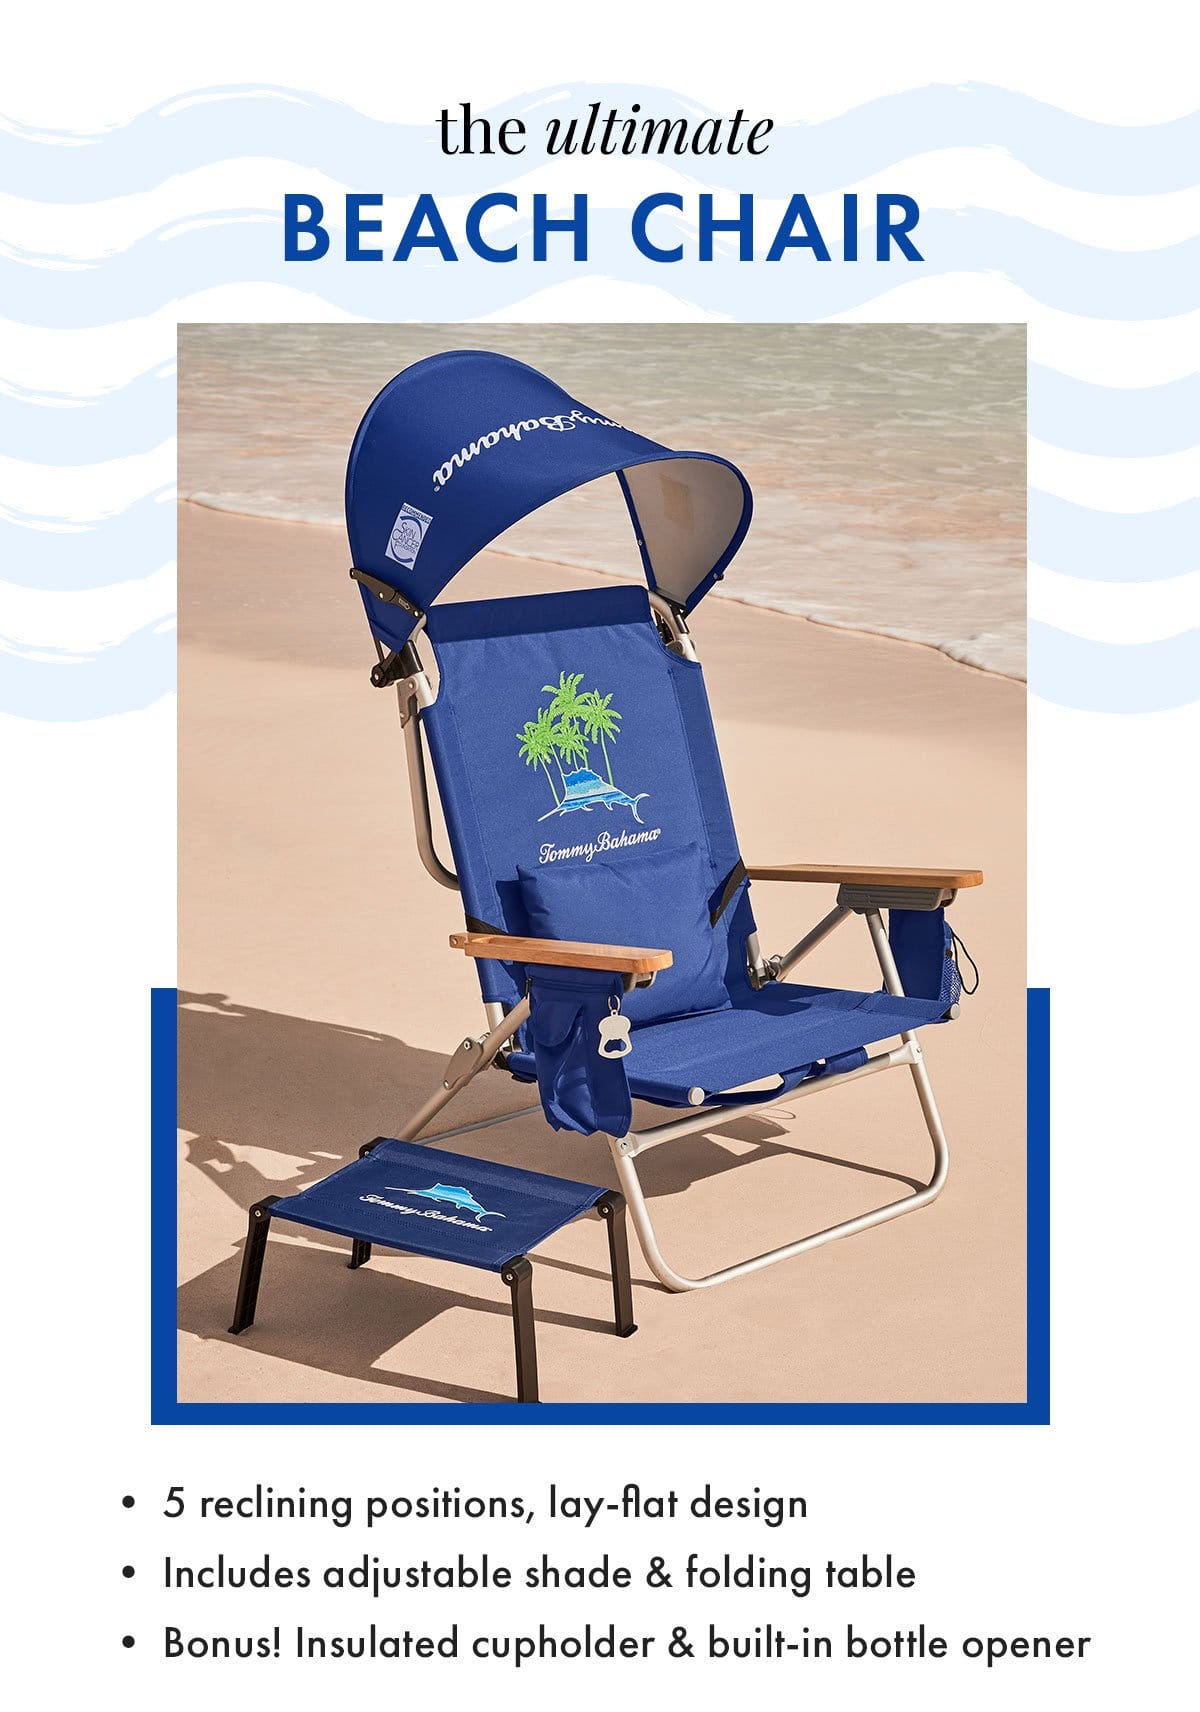 The Ultimate Beach Chair. 5 reclining positions, lay-flat design. Includes adjusting shade & folding table. Bonus: insulated cupholder & built-in bottle opener.